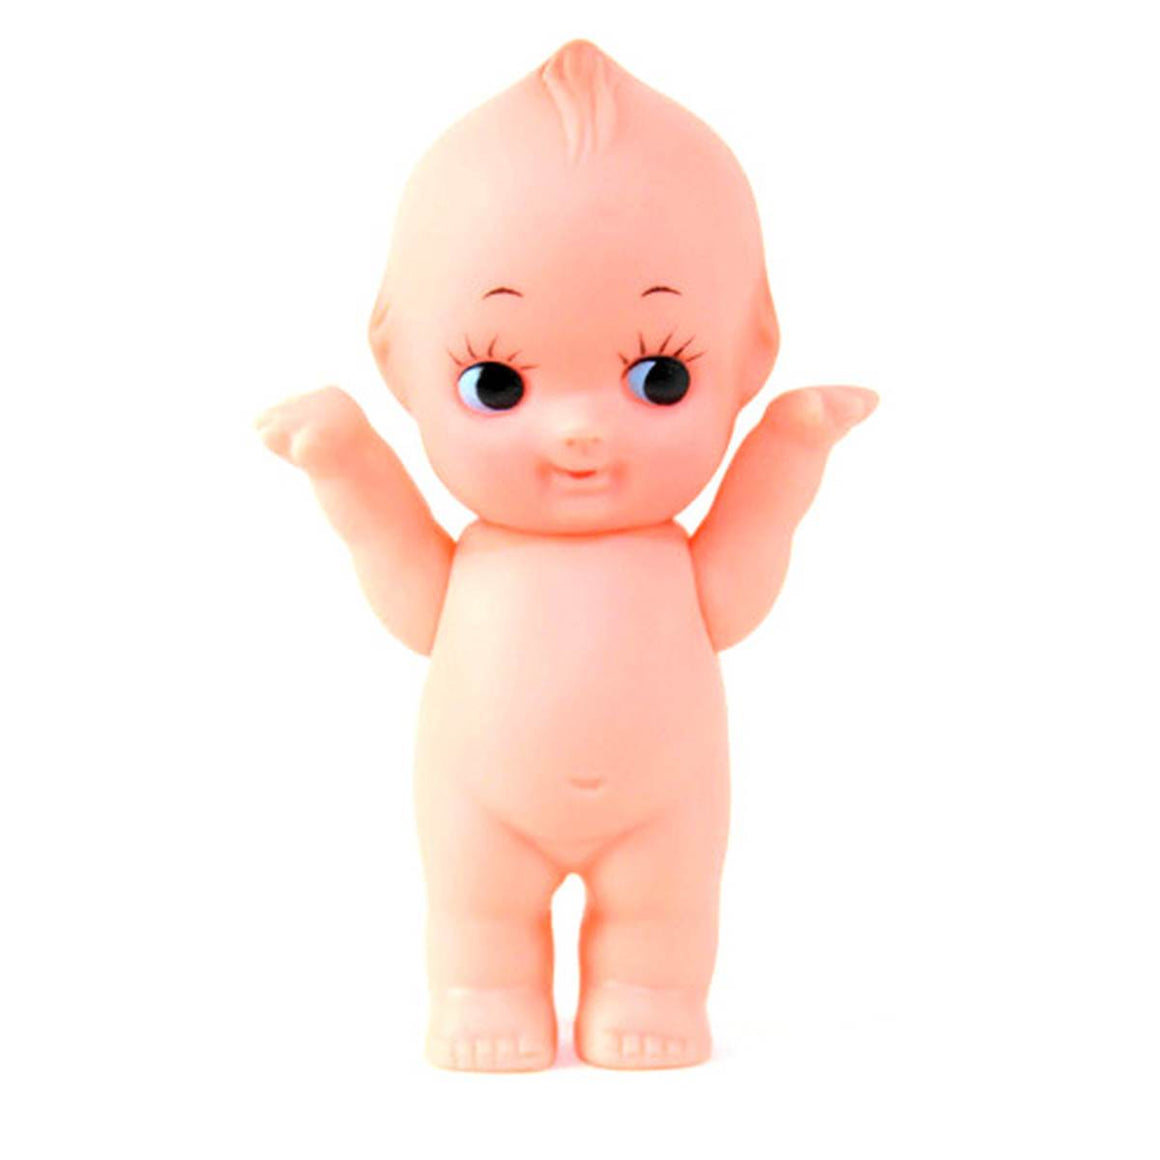 A vintage style Kewpie doll, shown standing with arms upraised. The doll is nude, cherub- like and features large eyes with distinct eyelashes.